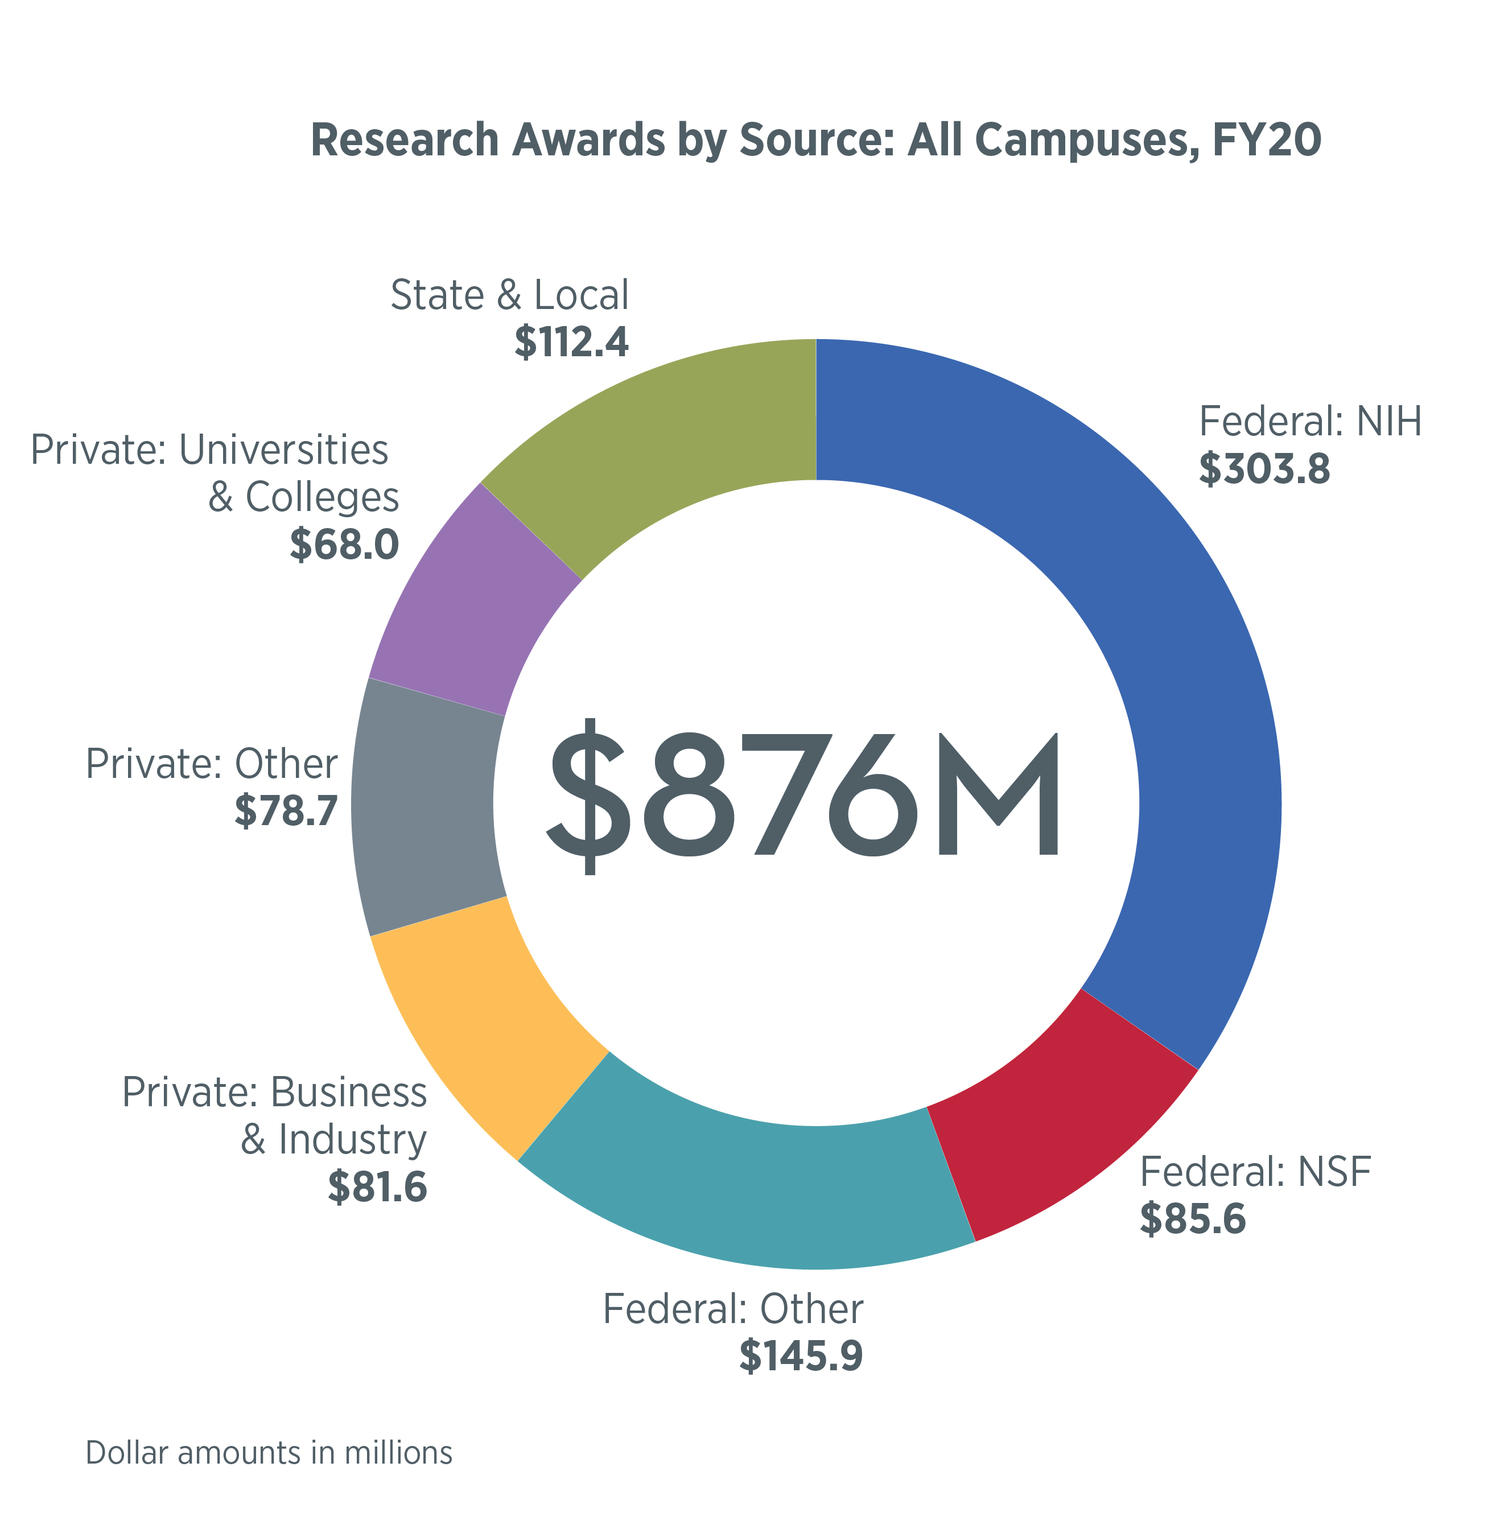 Research Awards by Source (All Campuses, FY20): $303.8M Federal NIH; $85.6M Federal-NSF; $145.9M Federal-Other; $81.6M Private-Business/Industry; $78.7M Private-Other; $68M Private-Universities & Colleges; $112.4M State & Local. $876M Total.